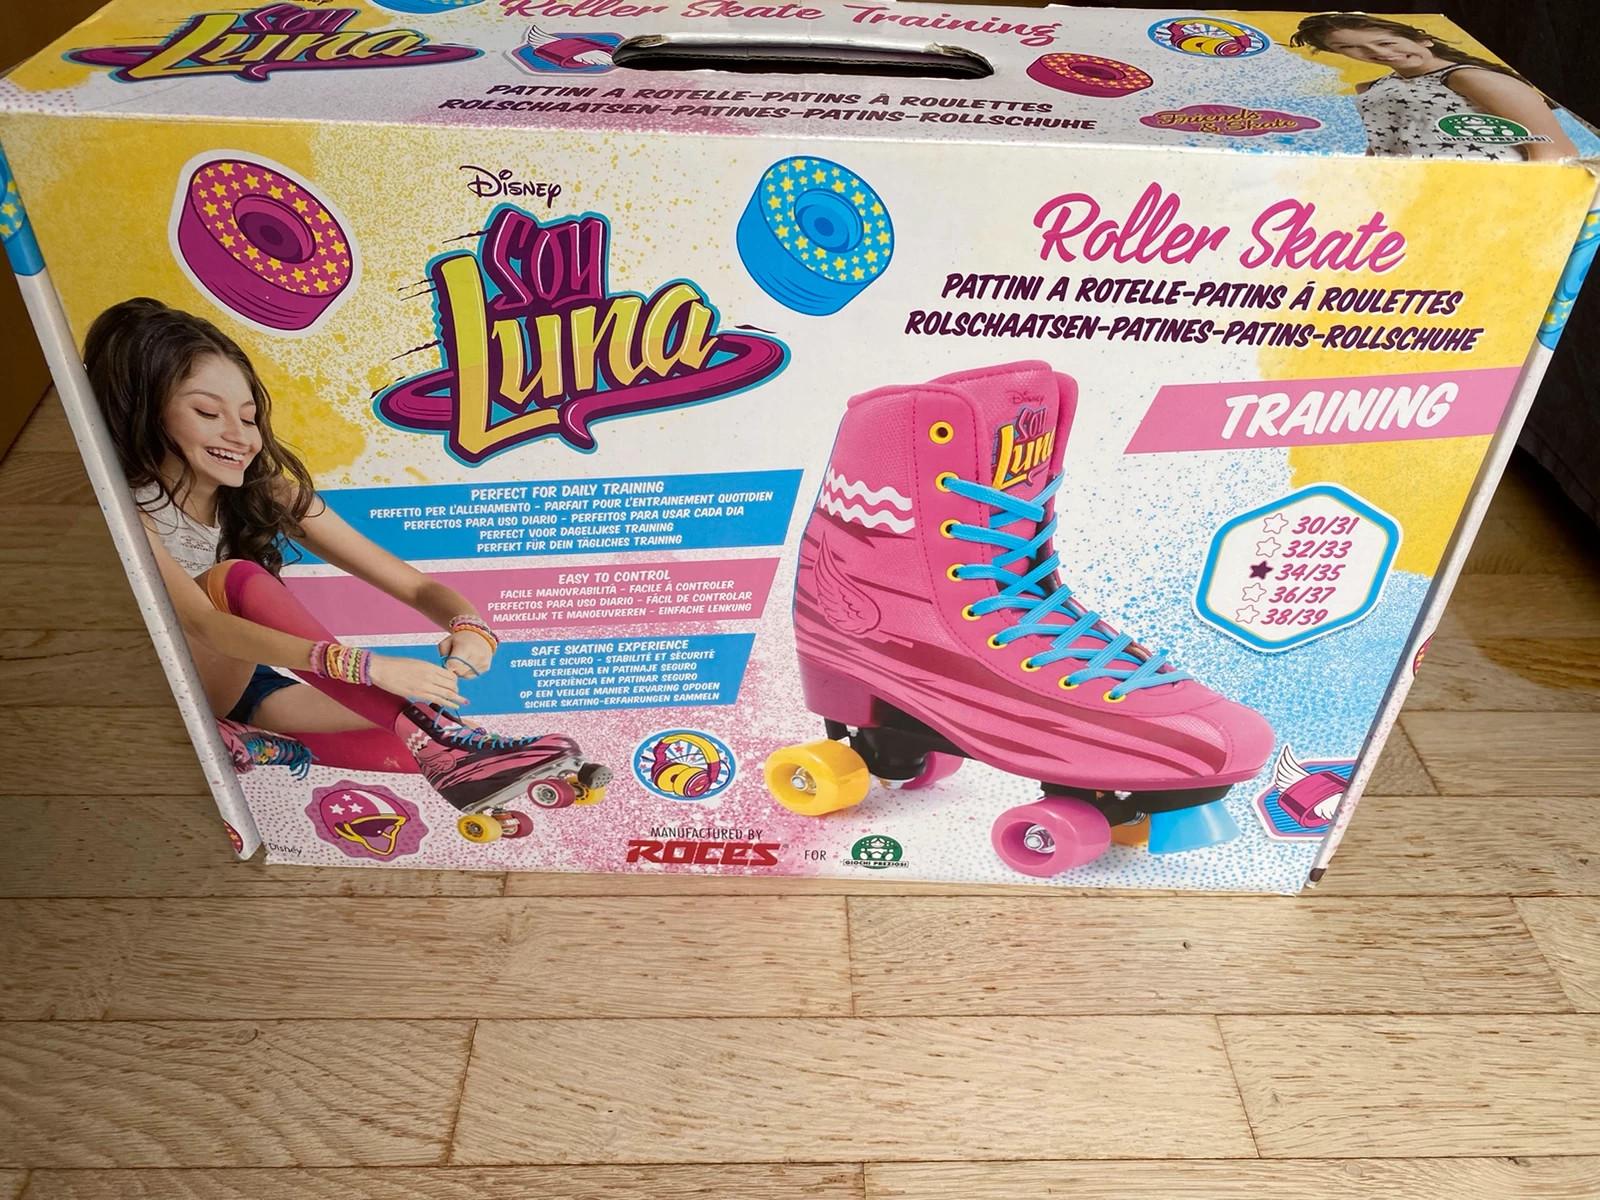 Pair of Disney Soy Luna Roulette Skate Rollers Size 30-31